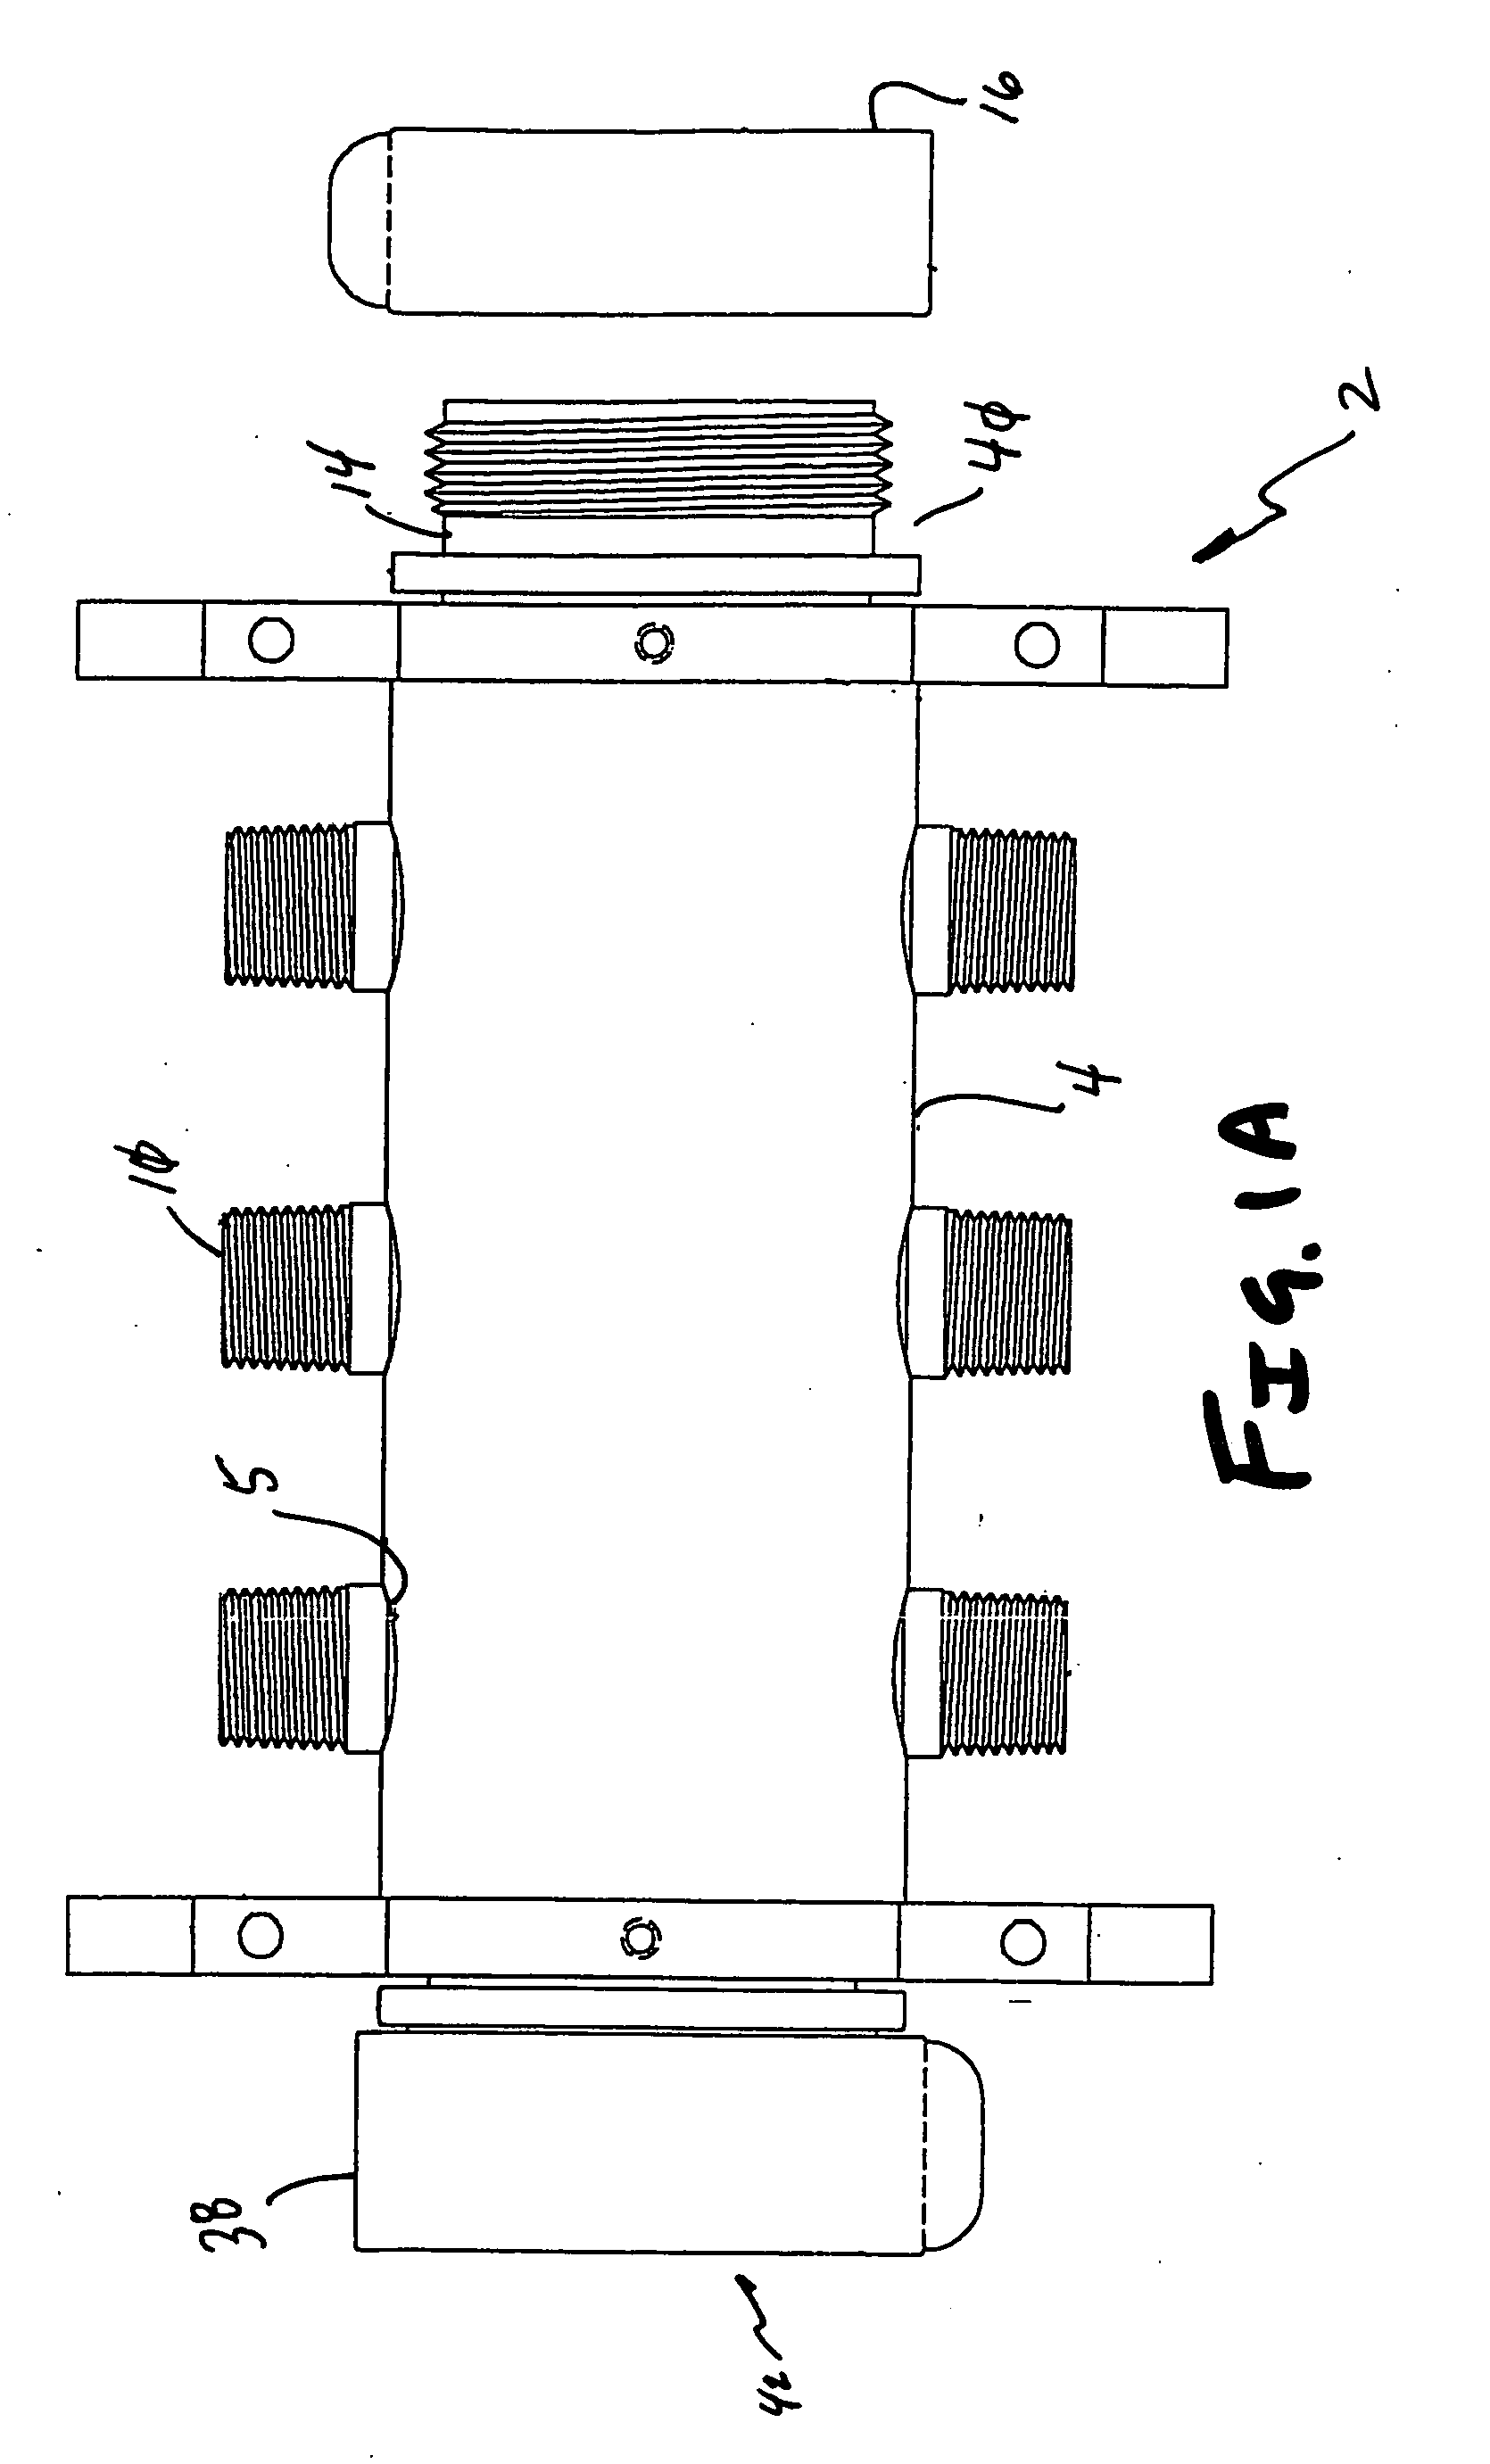 Manifold for selectively dispersing multiple fluid streams